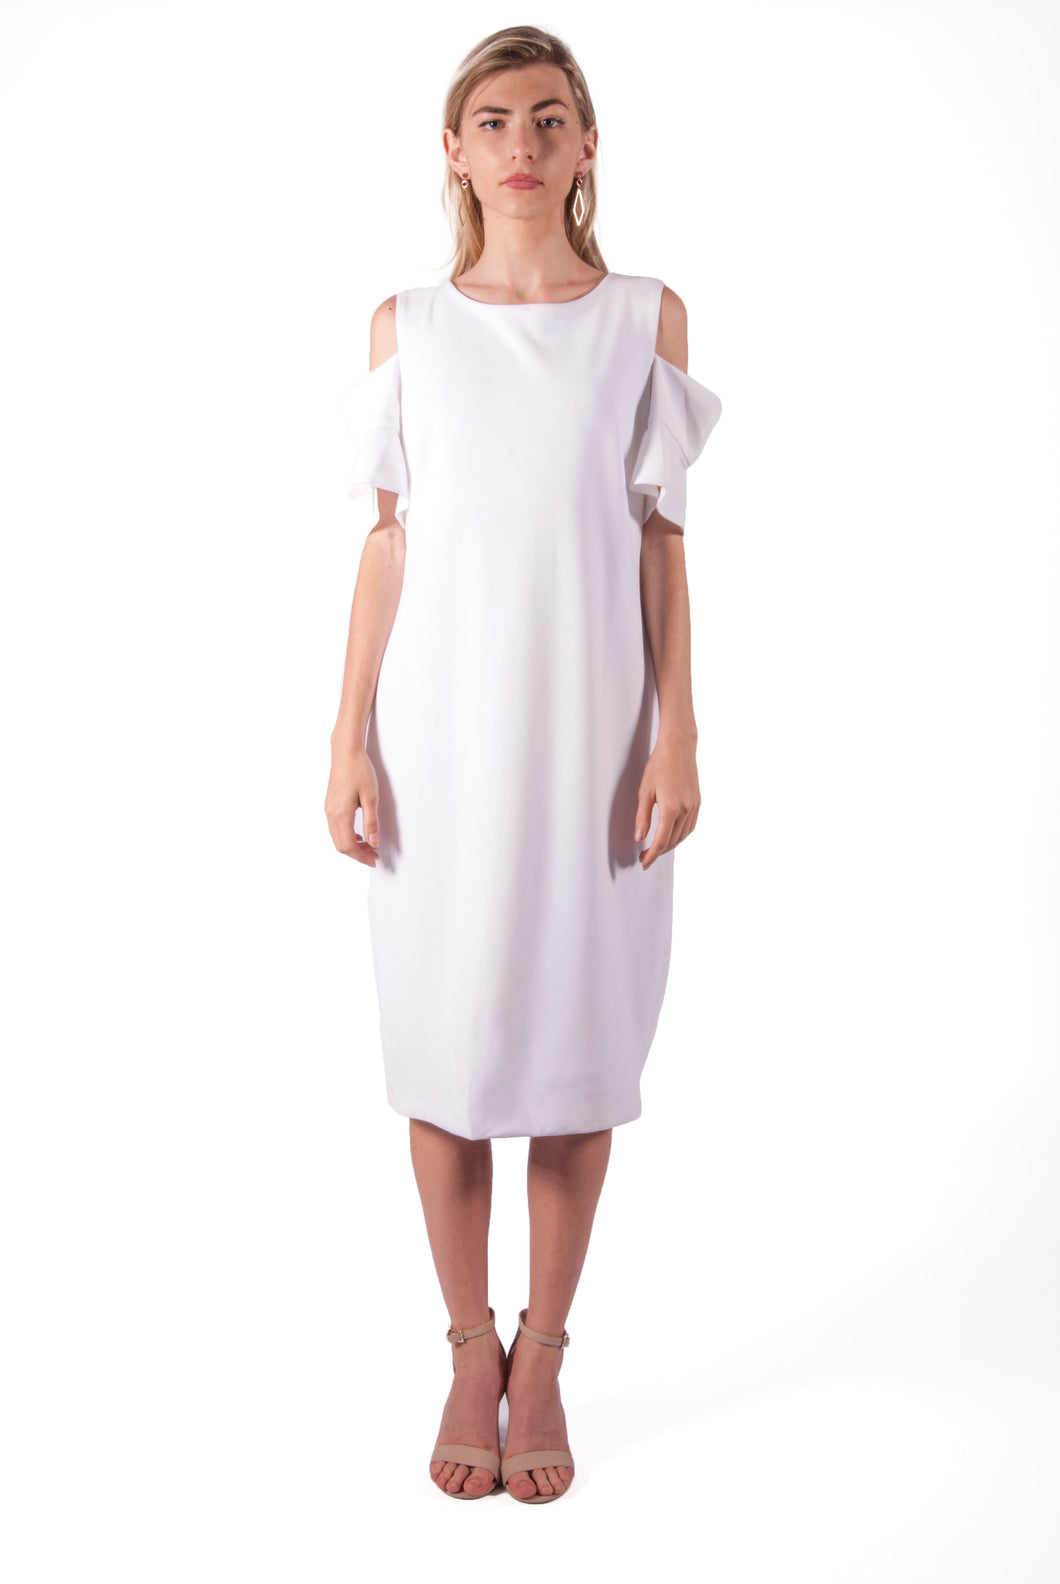 CALVIN KLEIN-SOLID SHEATH DRESS WITH FLAP SLEEVES